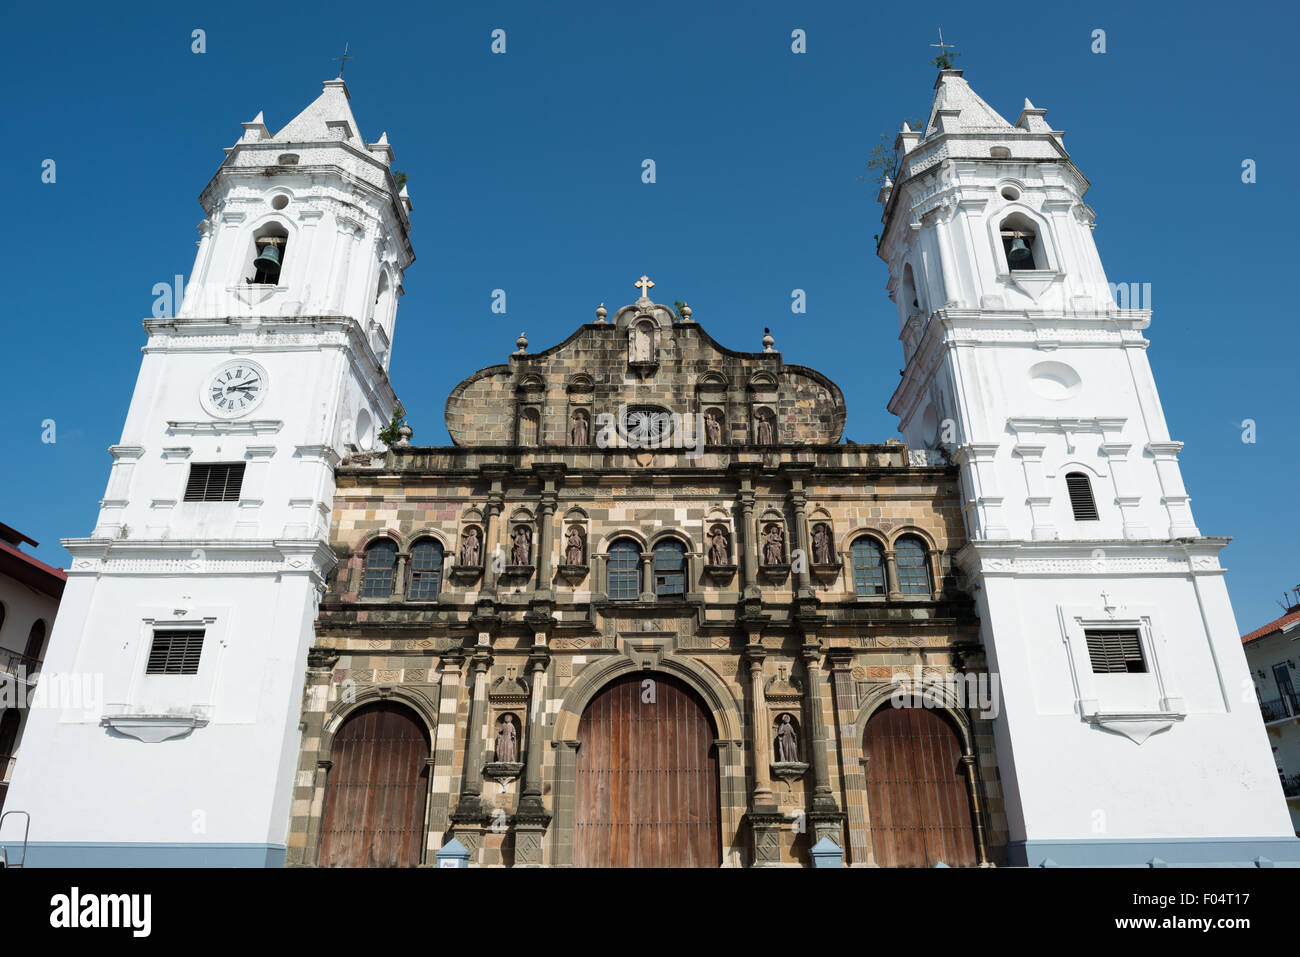 PANAMA CITY, Panama--Standing on the western side of Plaza de la Independencia (or Plaza Mayor), the Catedral Metropolitana was built between 1688 and 1796. It is one of the largest of Central America's cathedrals and was badly neglected before undergoing major restoration in 2003. Stock Photo